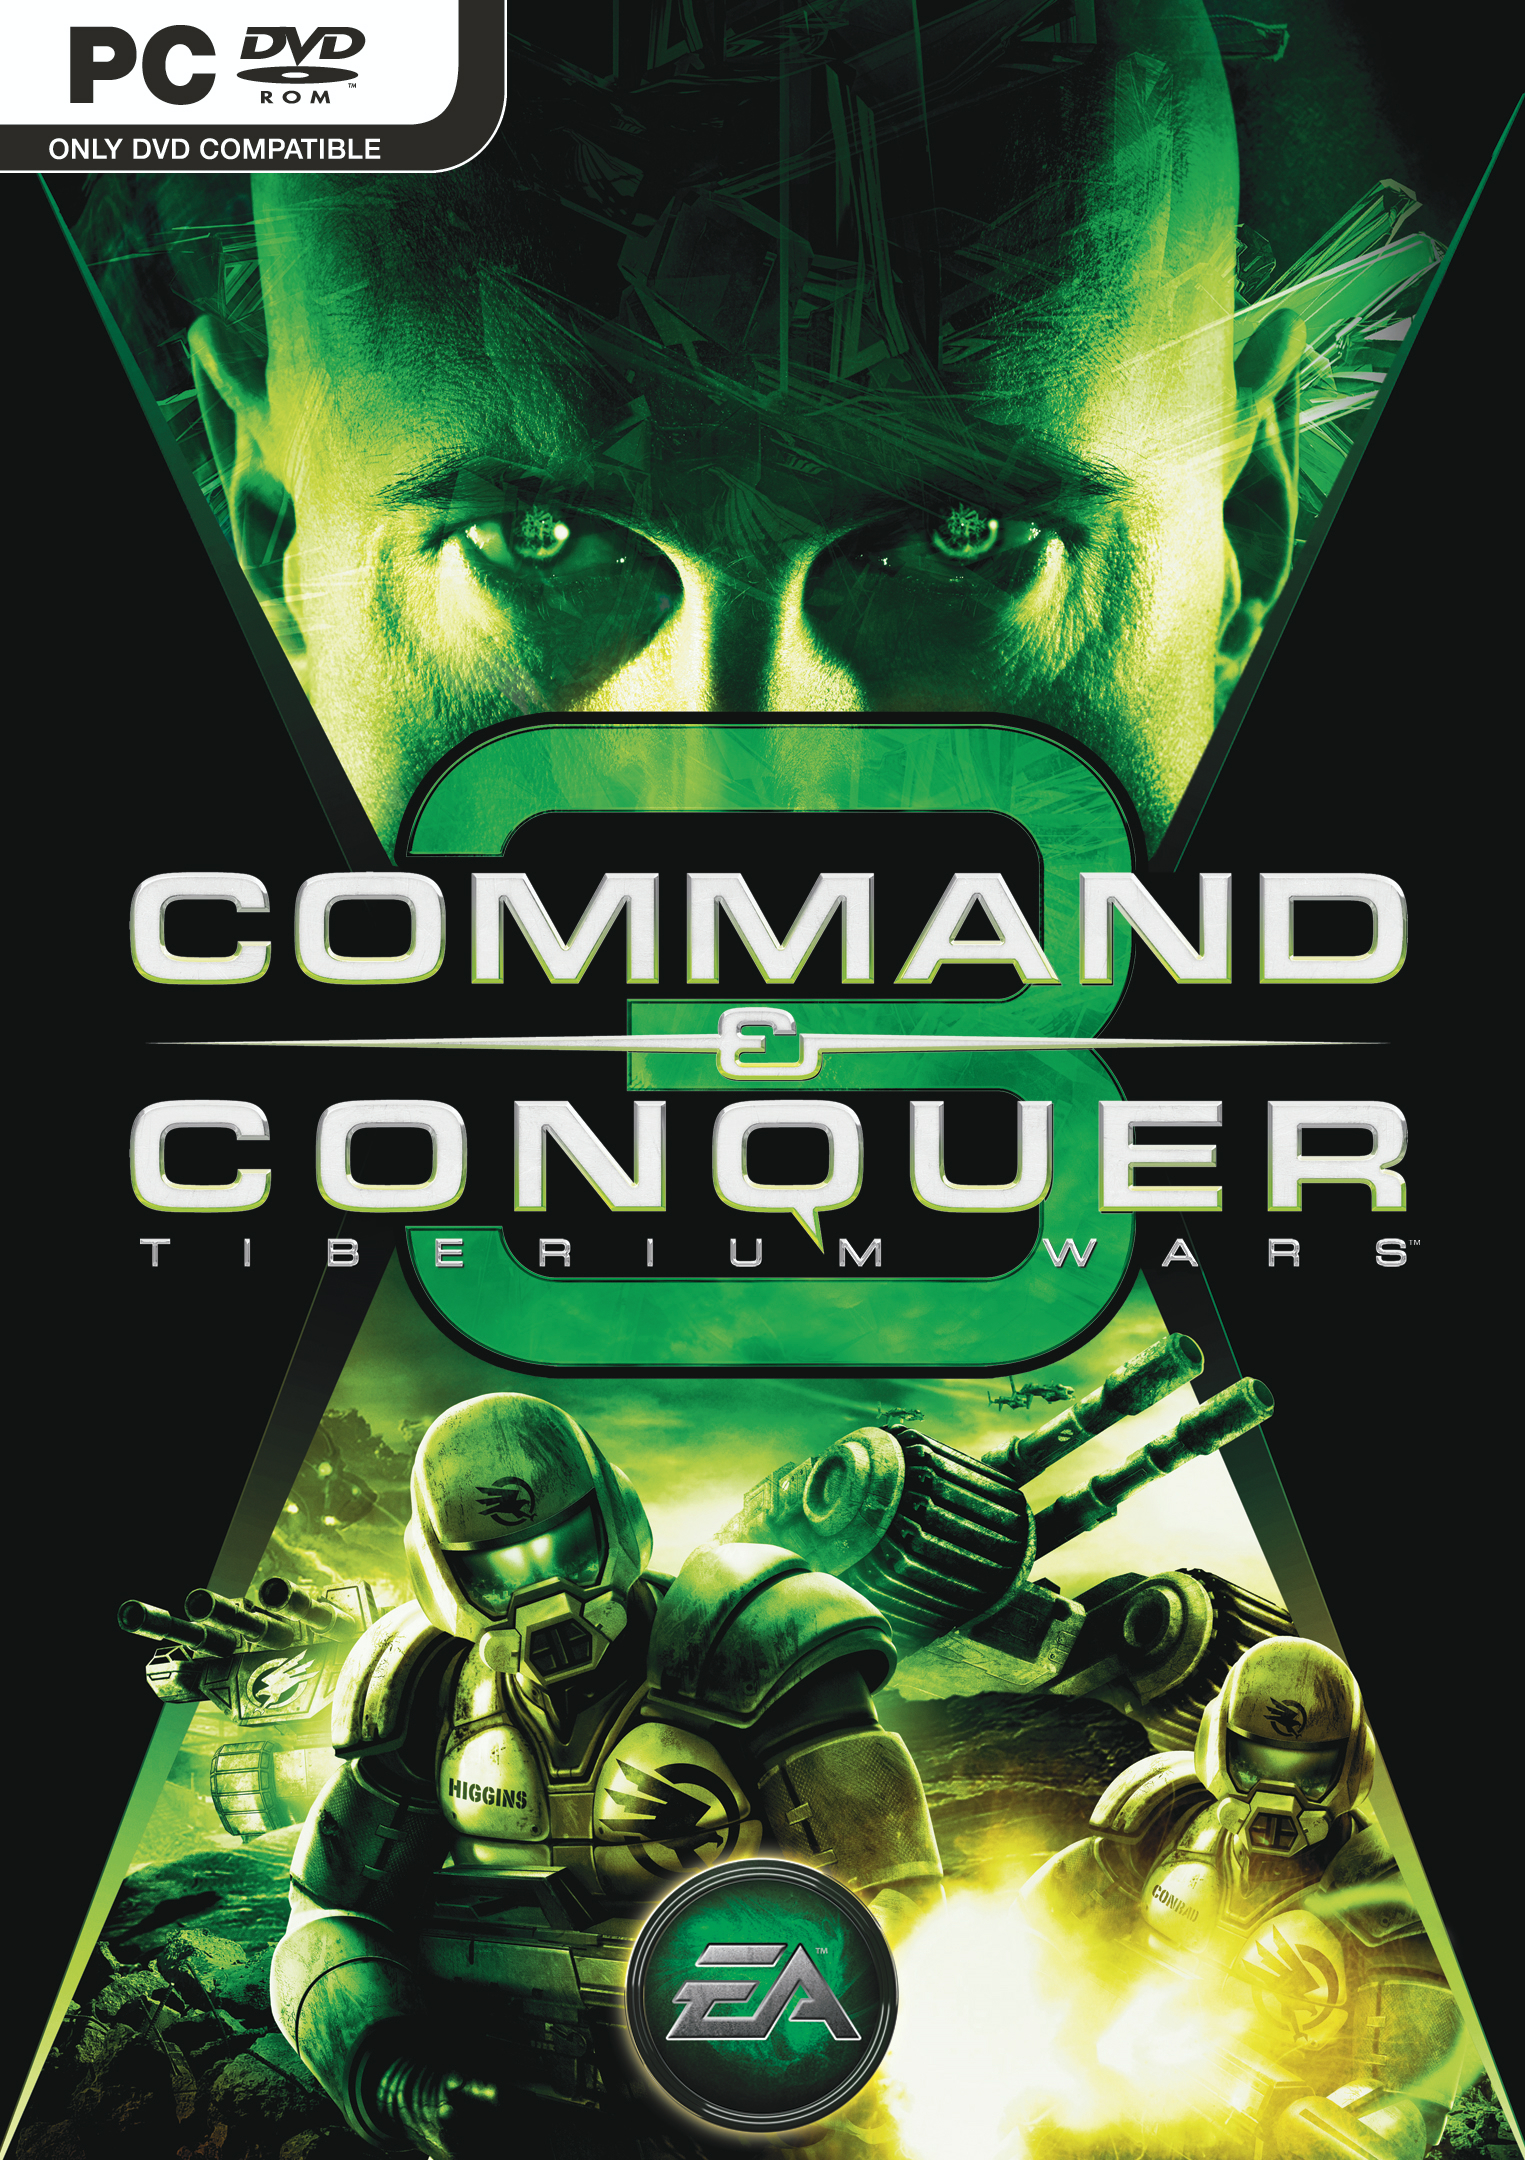 command and conquer download purchase windows 10